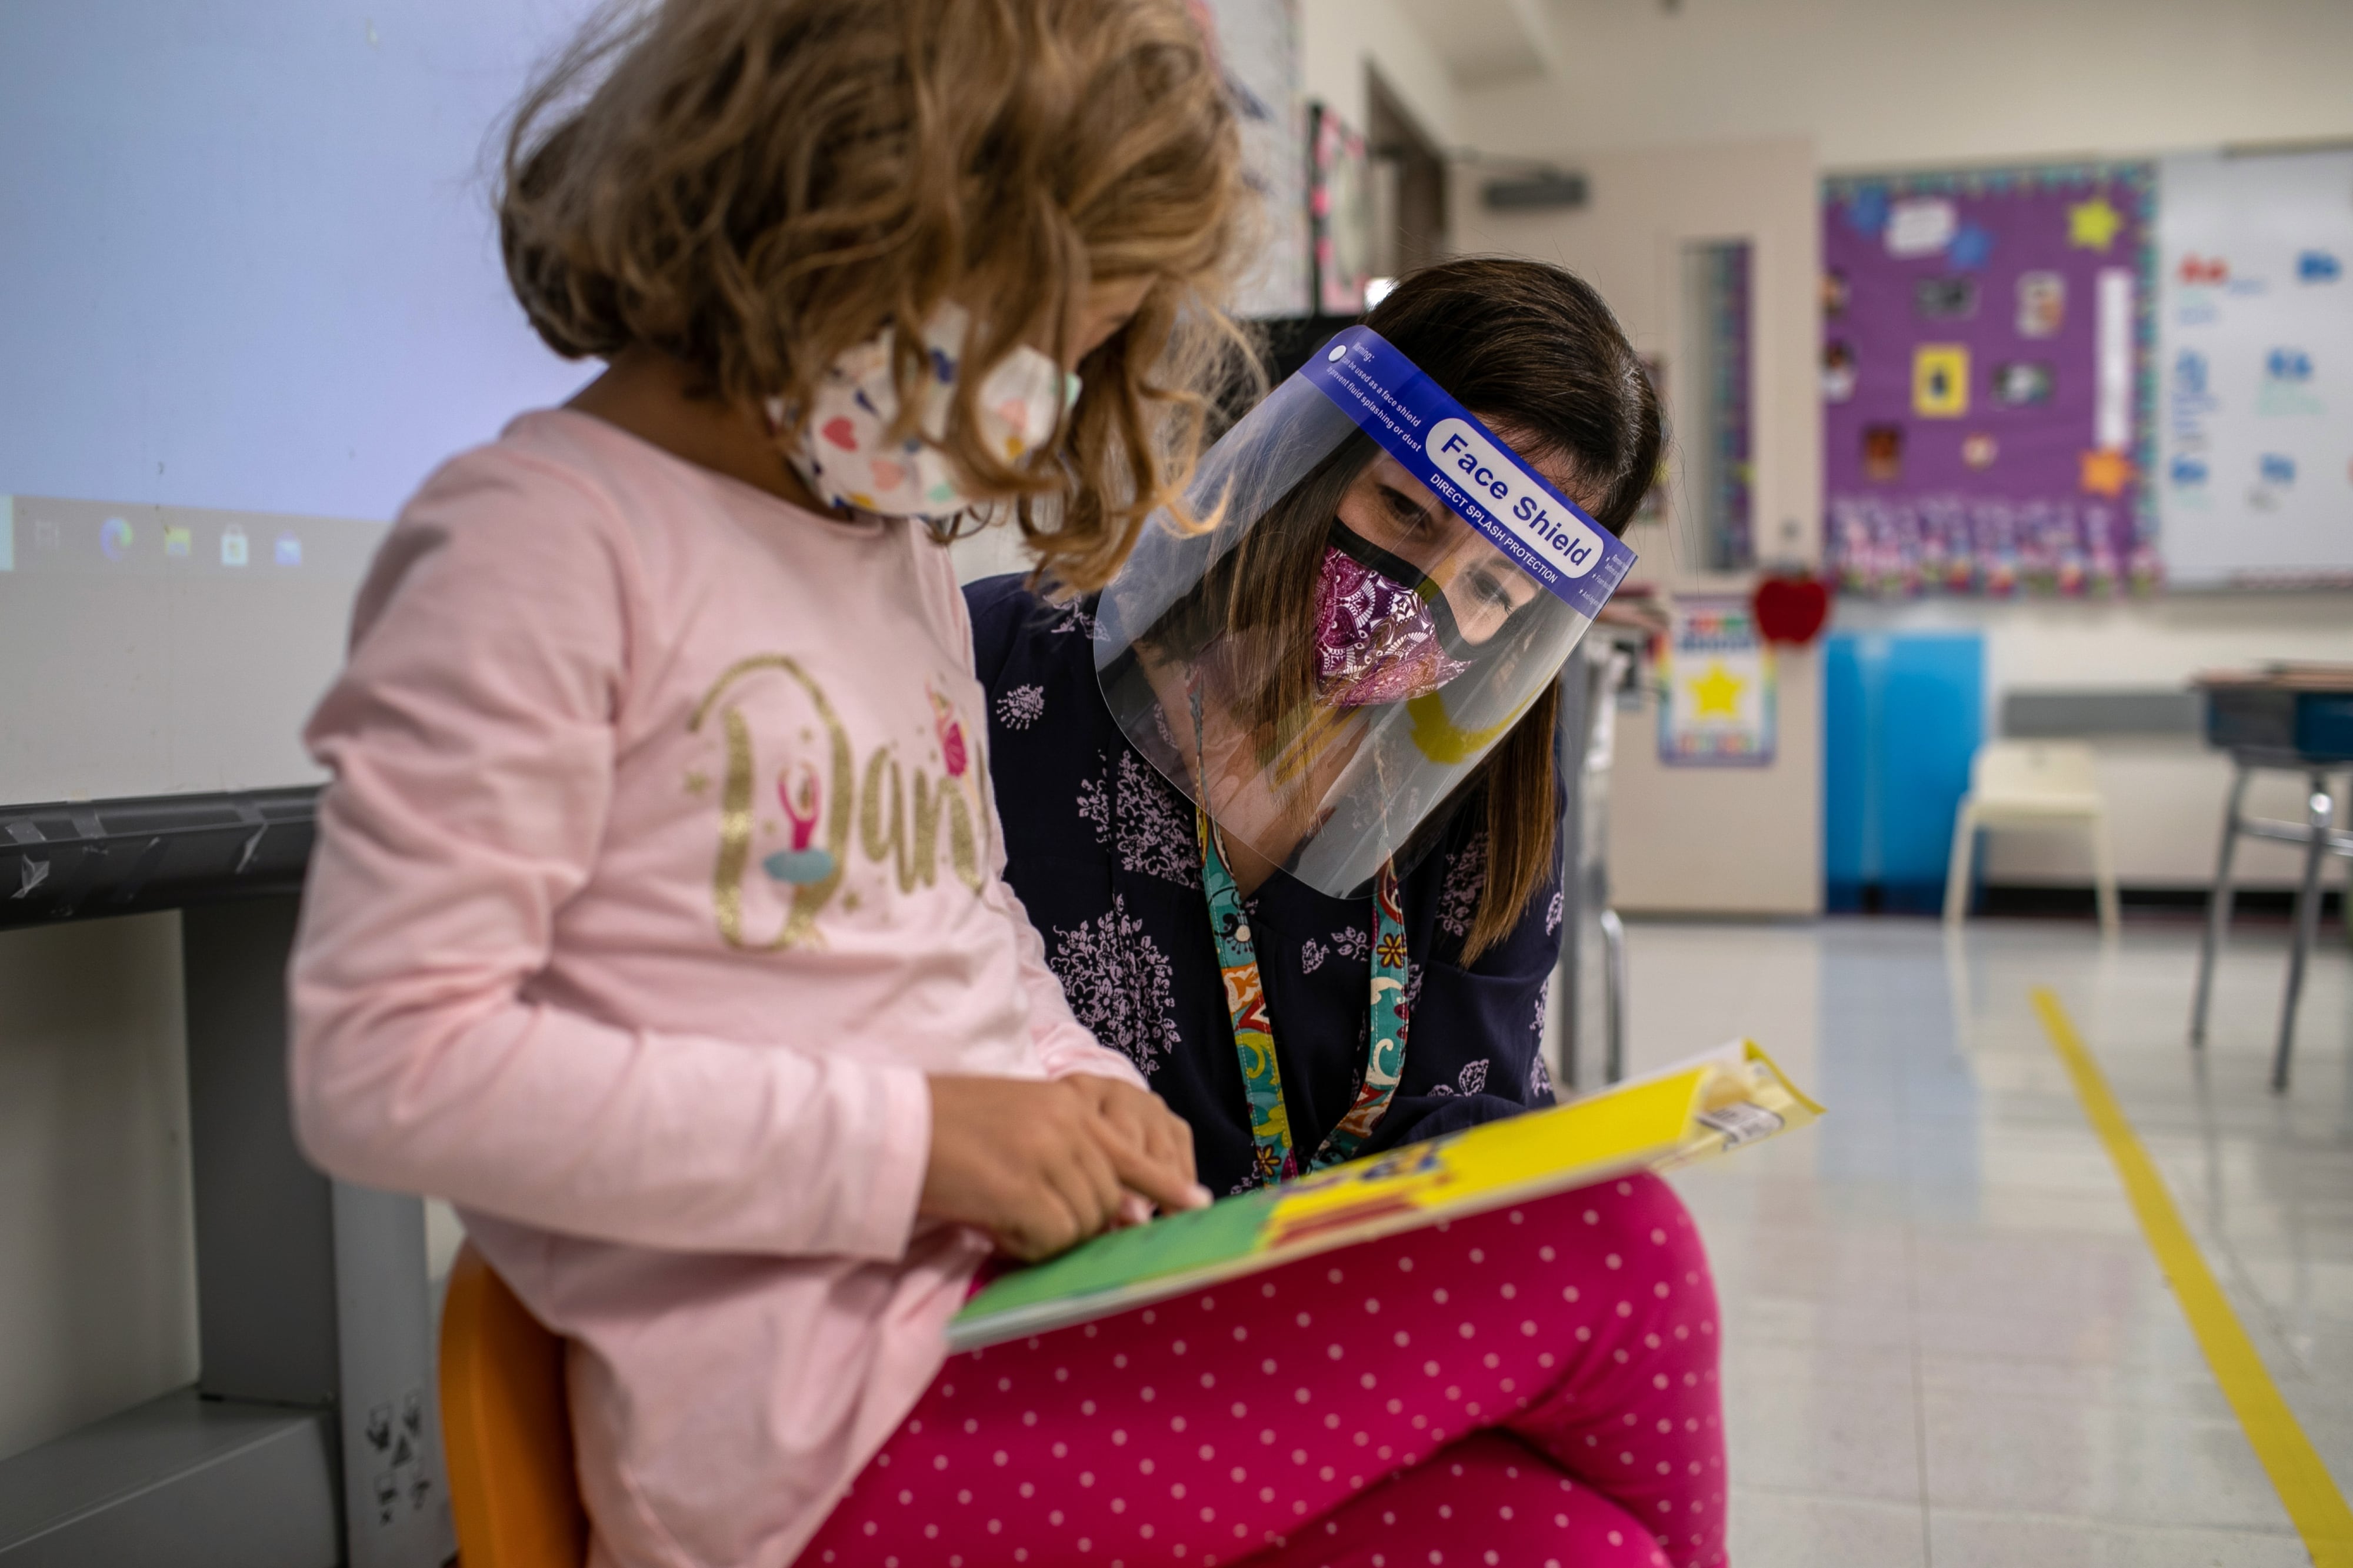 A young girl wearing a pink shirt and protective mask reads a book while her teacher, a woman wearing a face shield and mask, looks over her shoulder in a classroom.